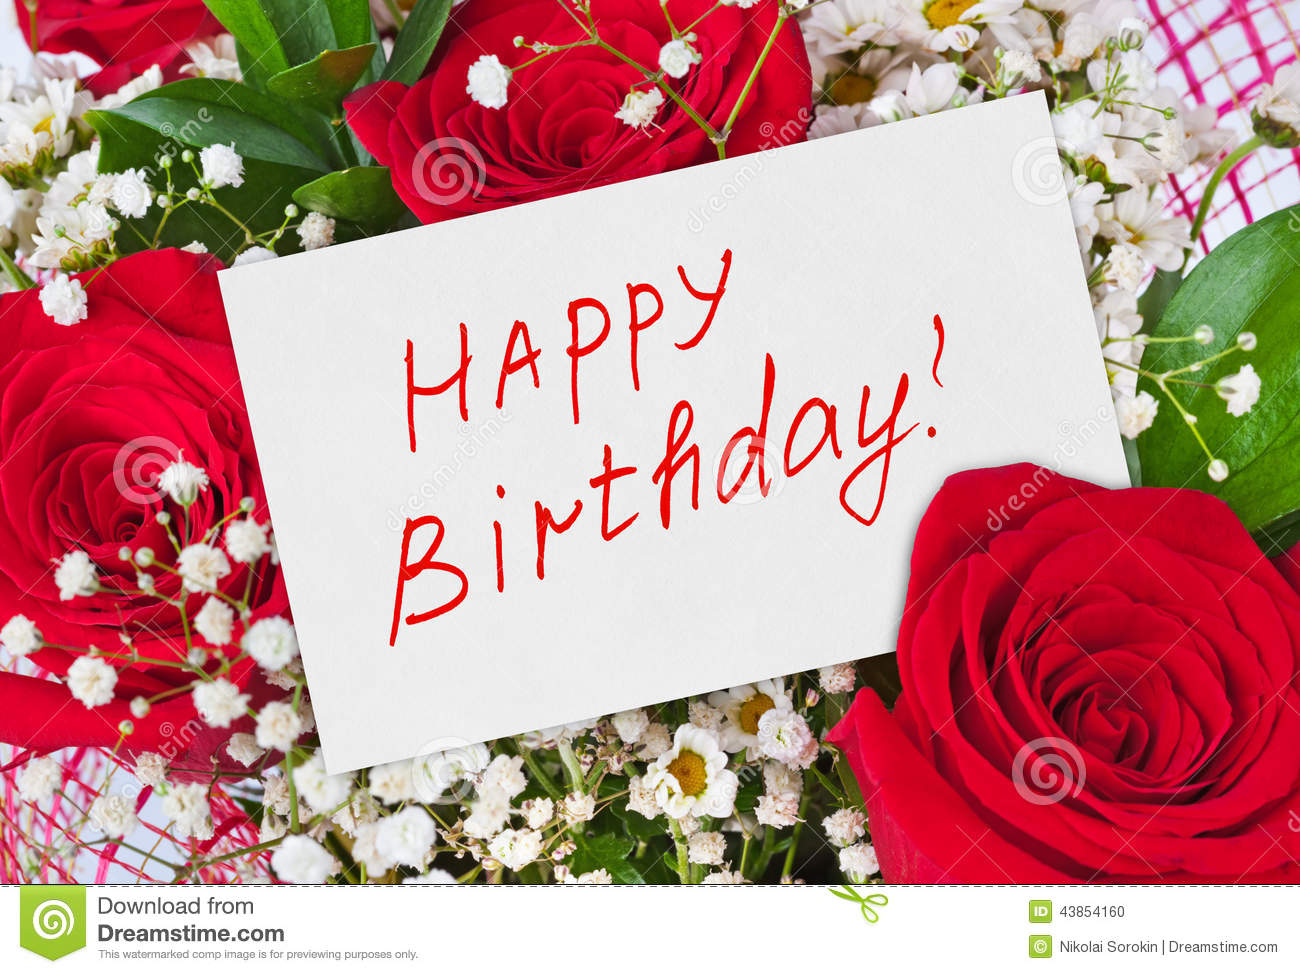 Roses Bouquet And Card Happy Birthday   Celebration Background